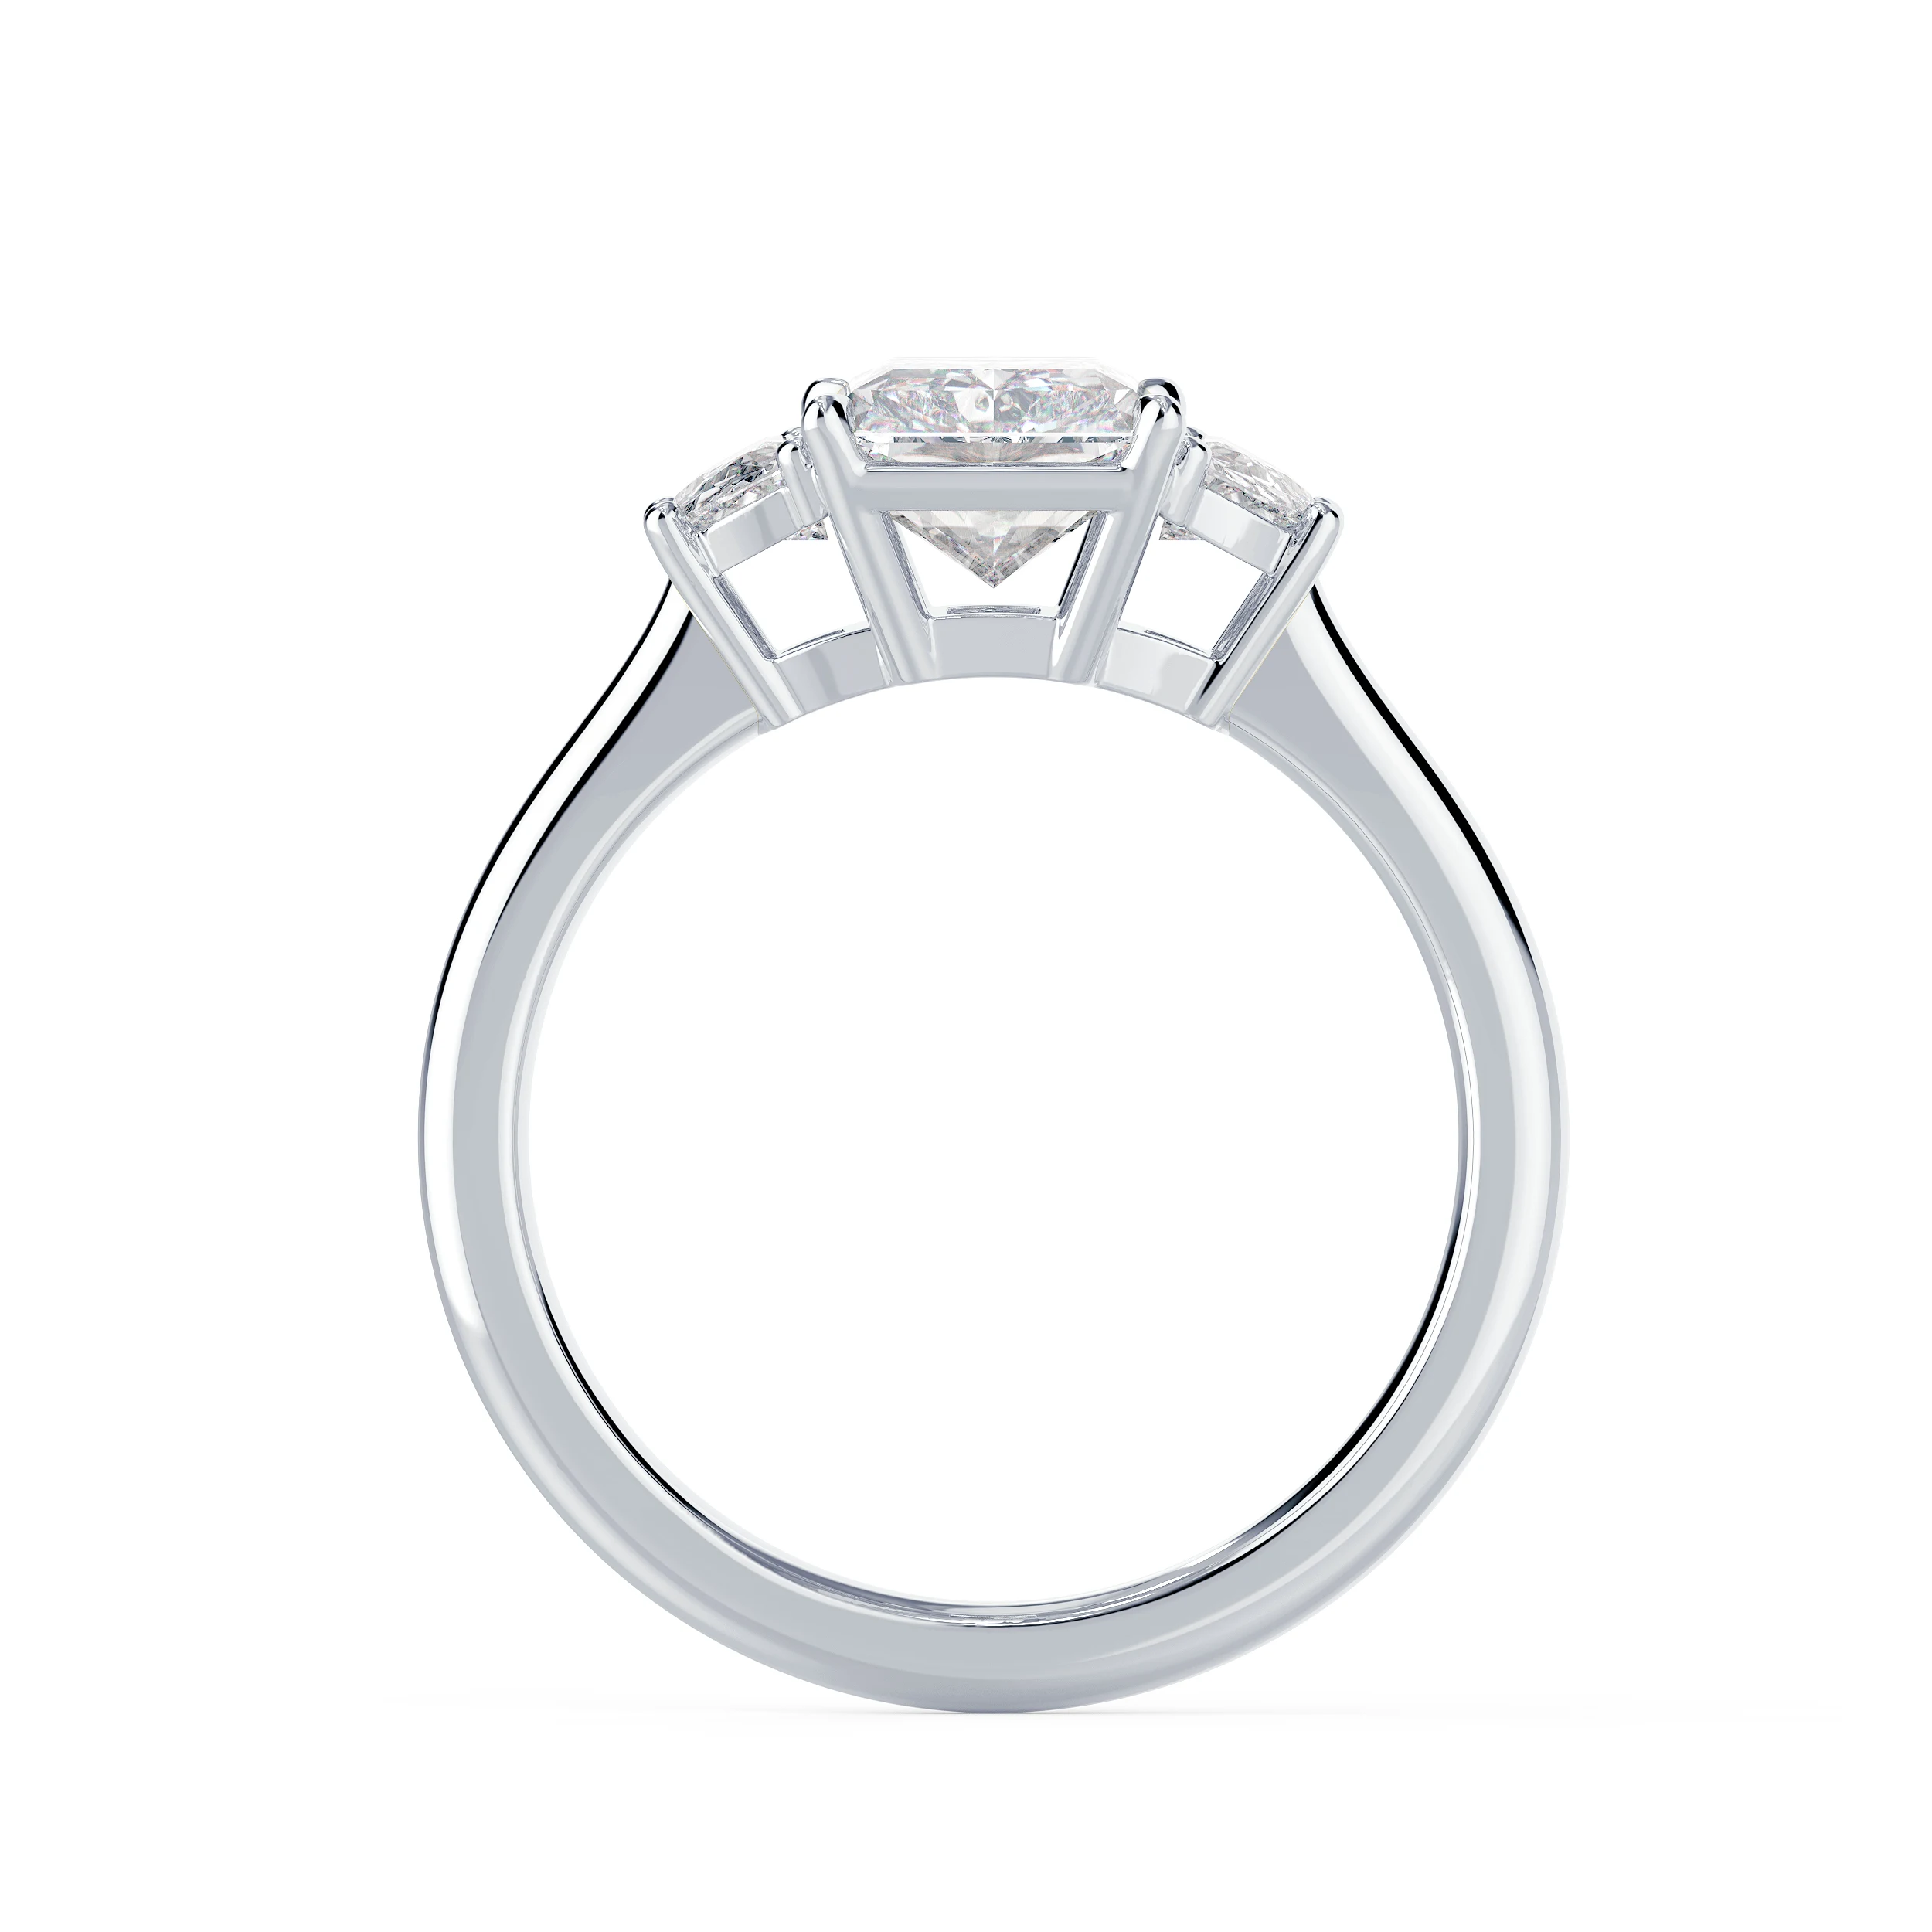 Diamonds set in White Gold Radiant and Half Moon Setting (Profile View)